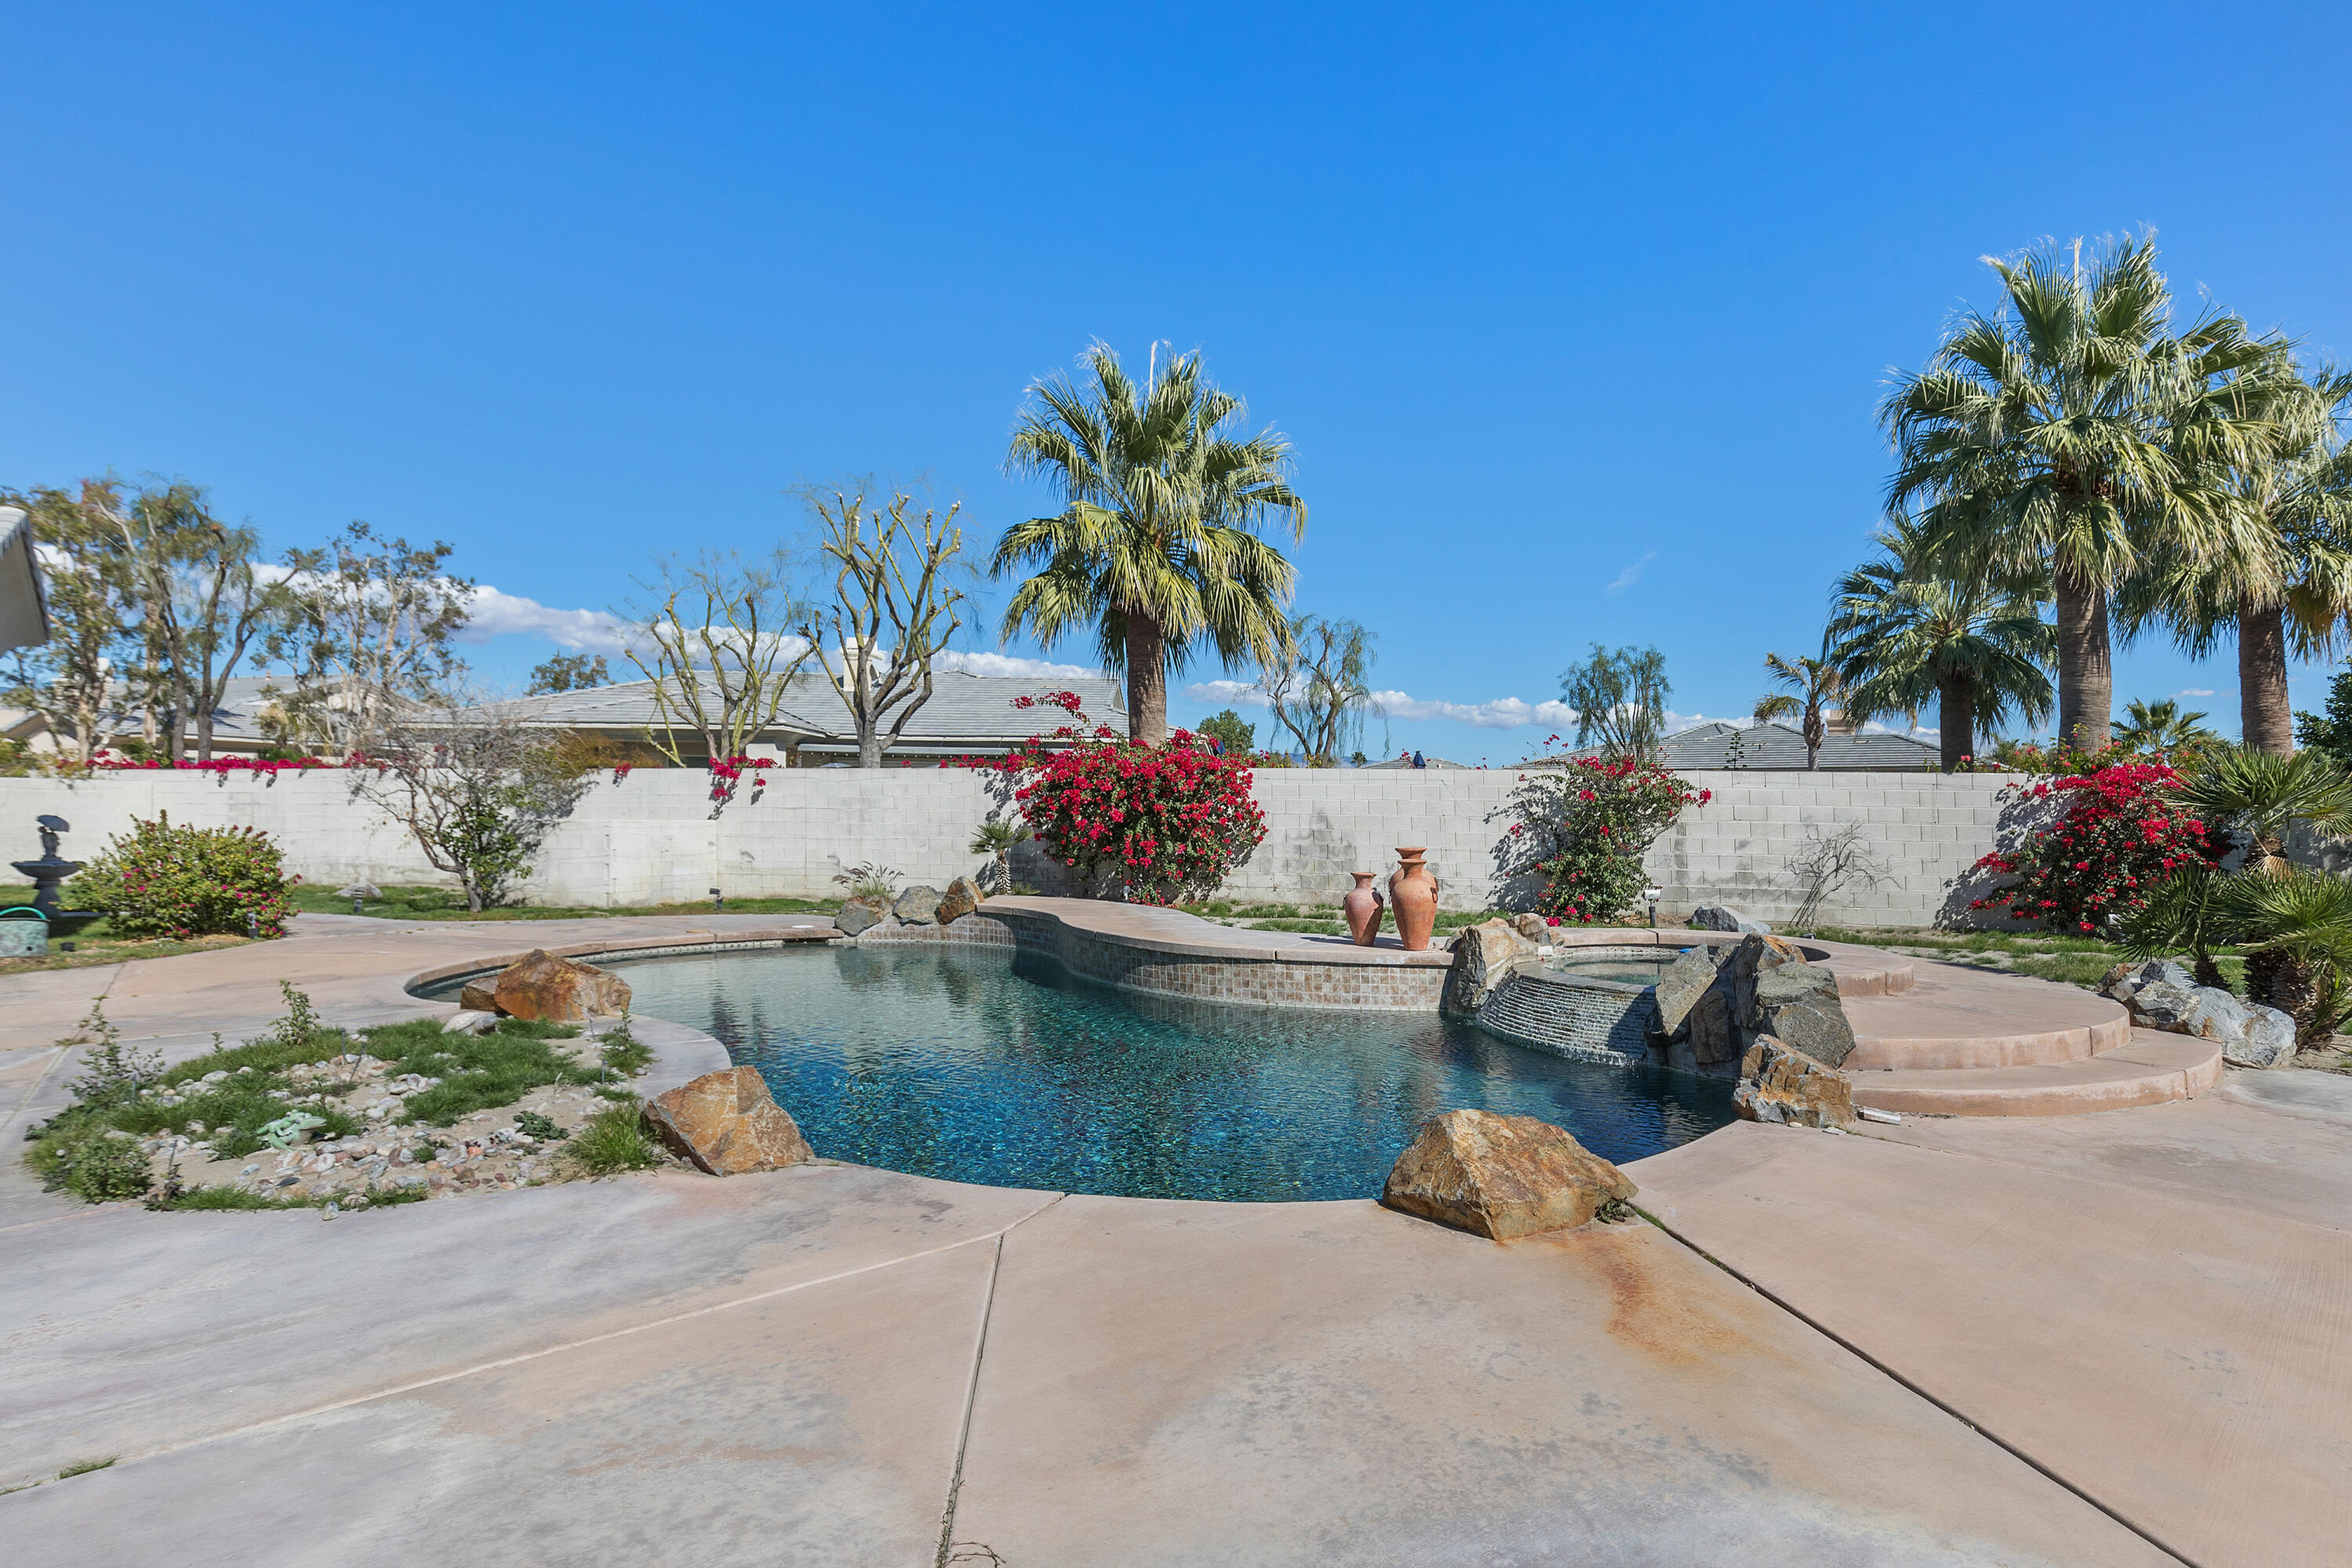 8 Chopin Court, Rancho Mirage, California, 92270, United States, 5 Bedrooms Bedrooms, ,5 BathroomsBathrooms,Residential,For Sale,8 Chopin Court,1499253